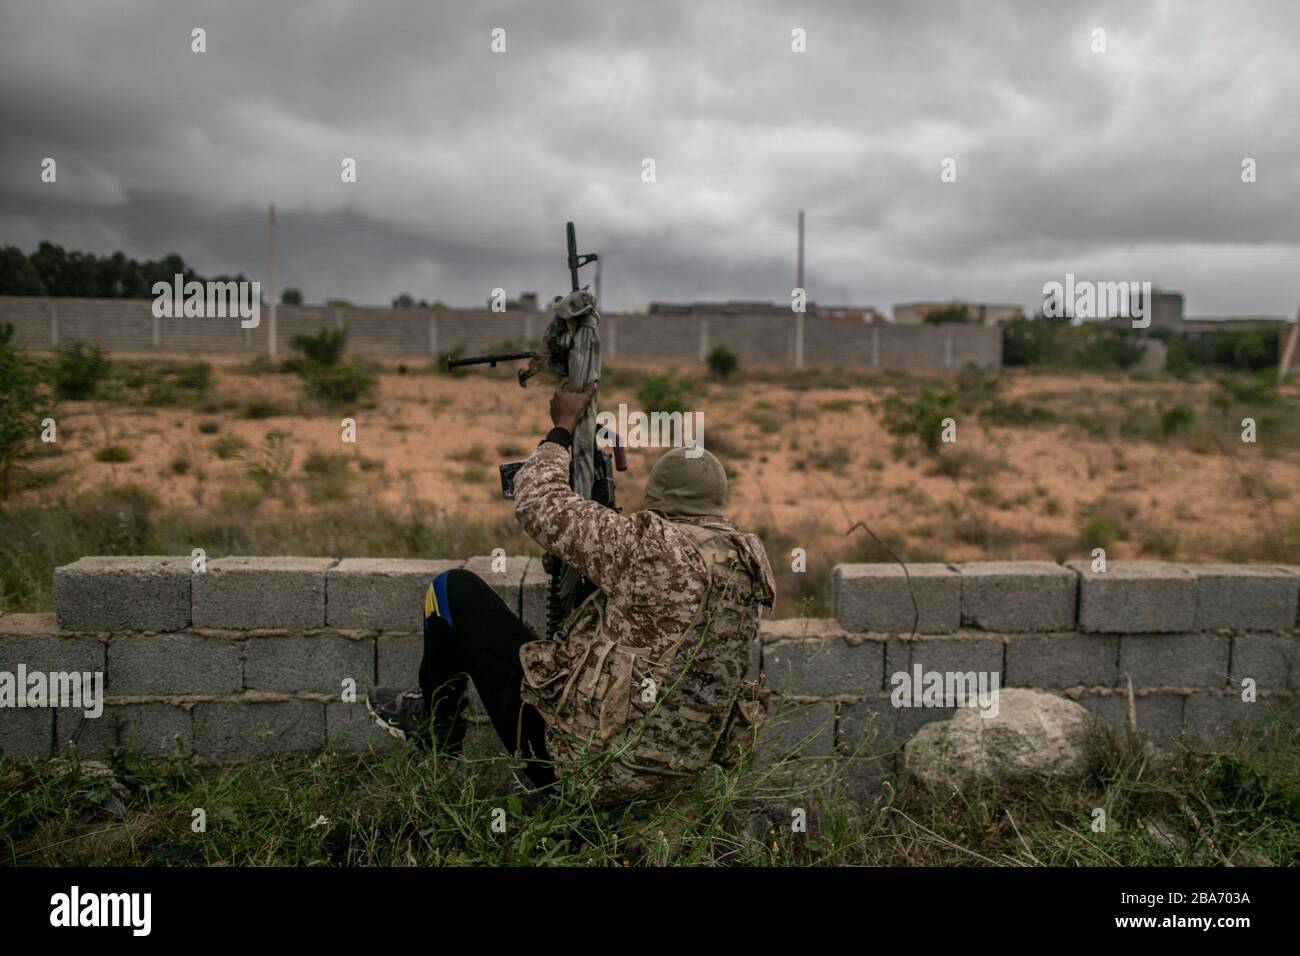 Tripoli, Libya. 25th Mar, 2020. A UN-backed Government of National Accord (GNA) fighter loses balance during clashes with East-based Libyan National Army (LNA) at Ain-Zara frontline in Tripoli, Libya, March 25, 2020. The Minister of Health of Libya's UN-backed government, Ehmid Bin Omar, on Tuesday announced the first novel coronavirus infection in the country. Credit: Amru Salahuddien/Xinhua/Alamy Live News Stock Photo